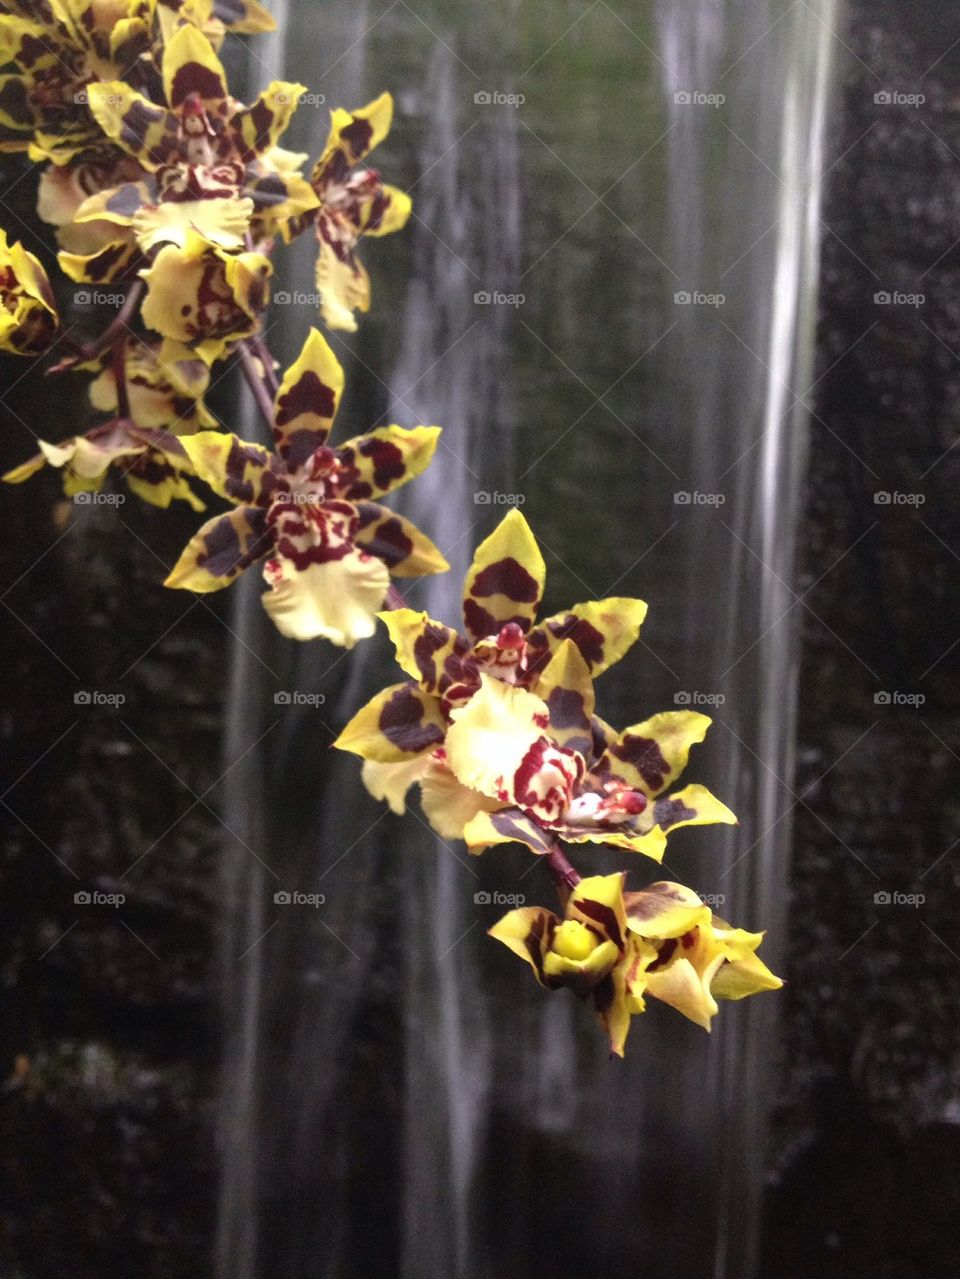 The orchid show